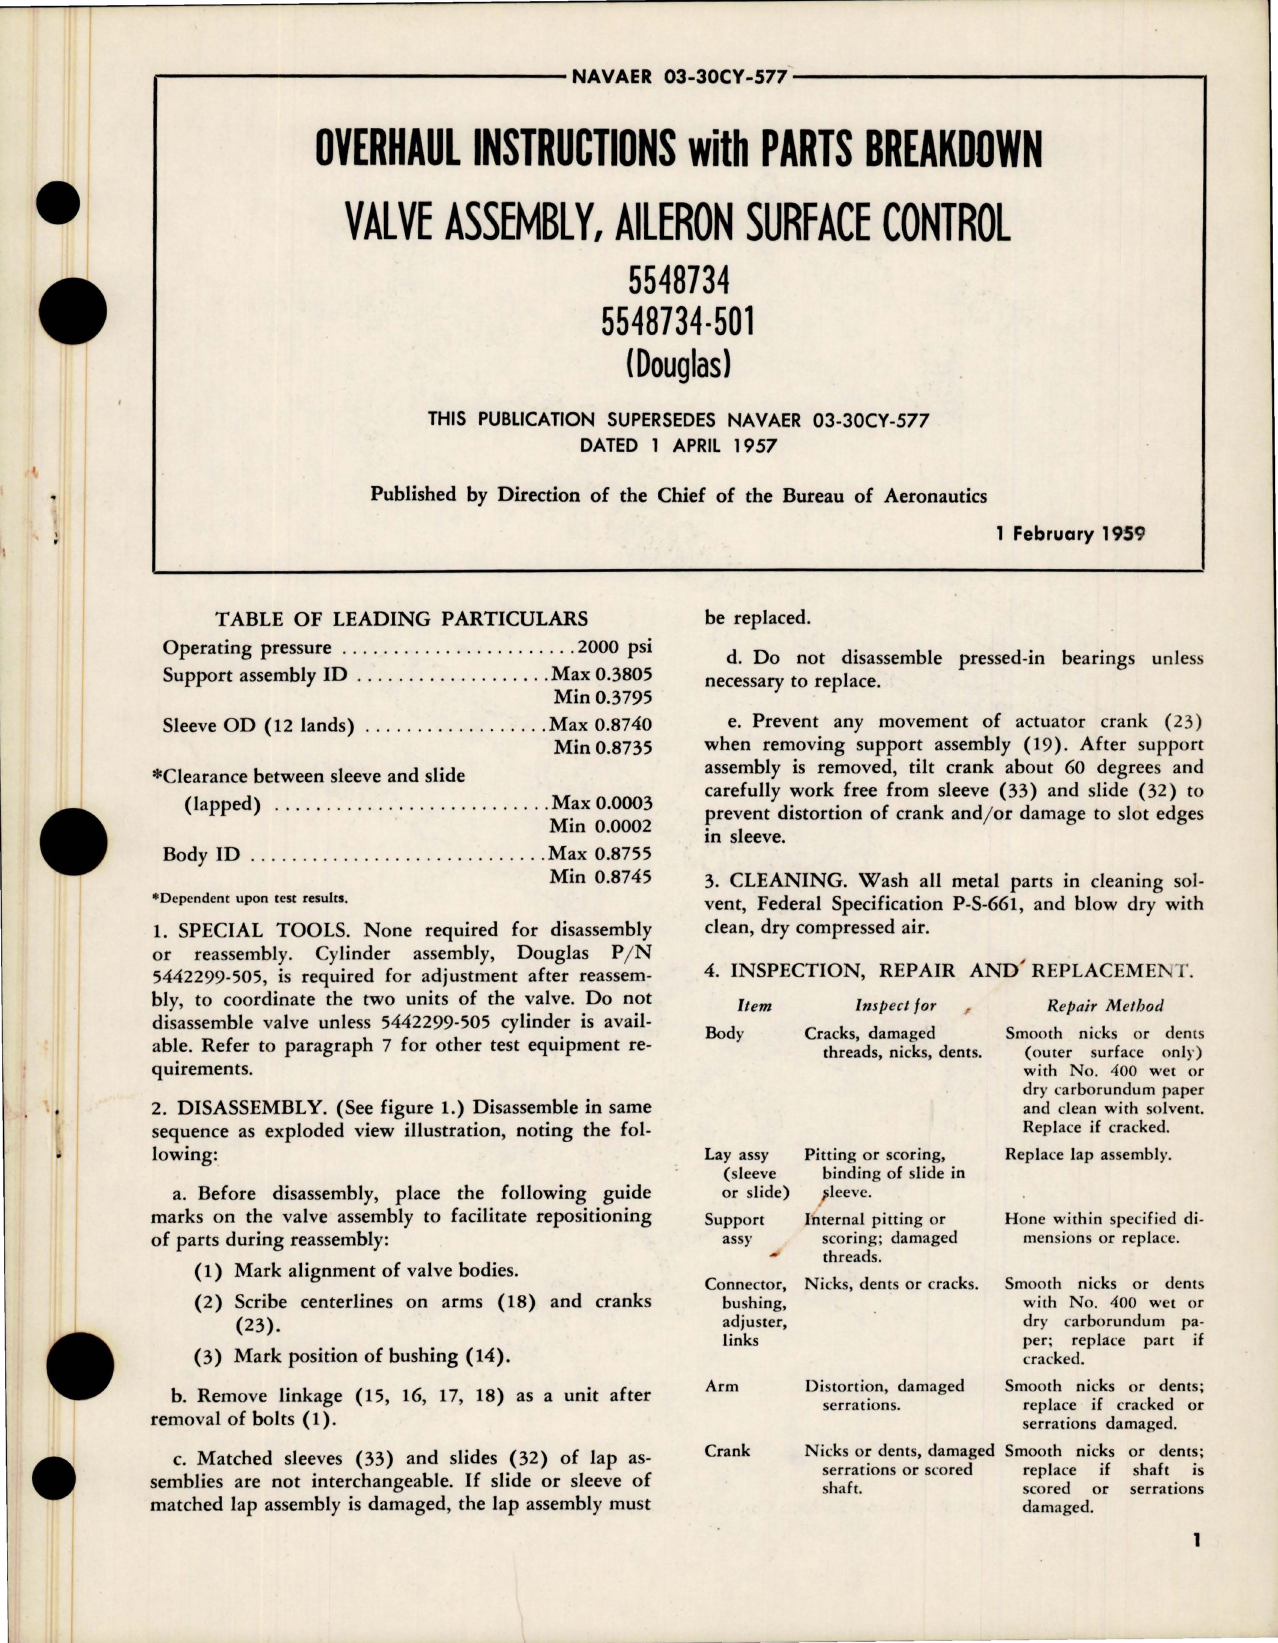 Sample page 1 from AirCorps Library document: Overhaul Instructions with Parts Breakdown for Aileron Surface Control Valve Assembly - 5548734, 5548734-501 